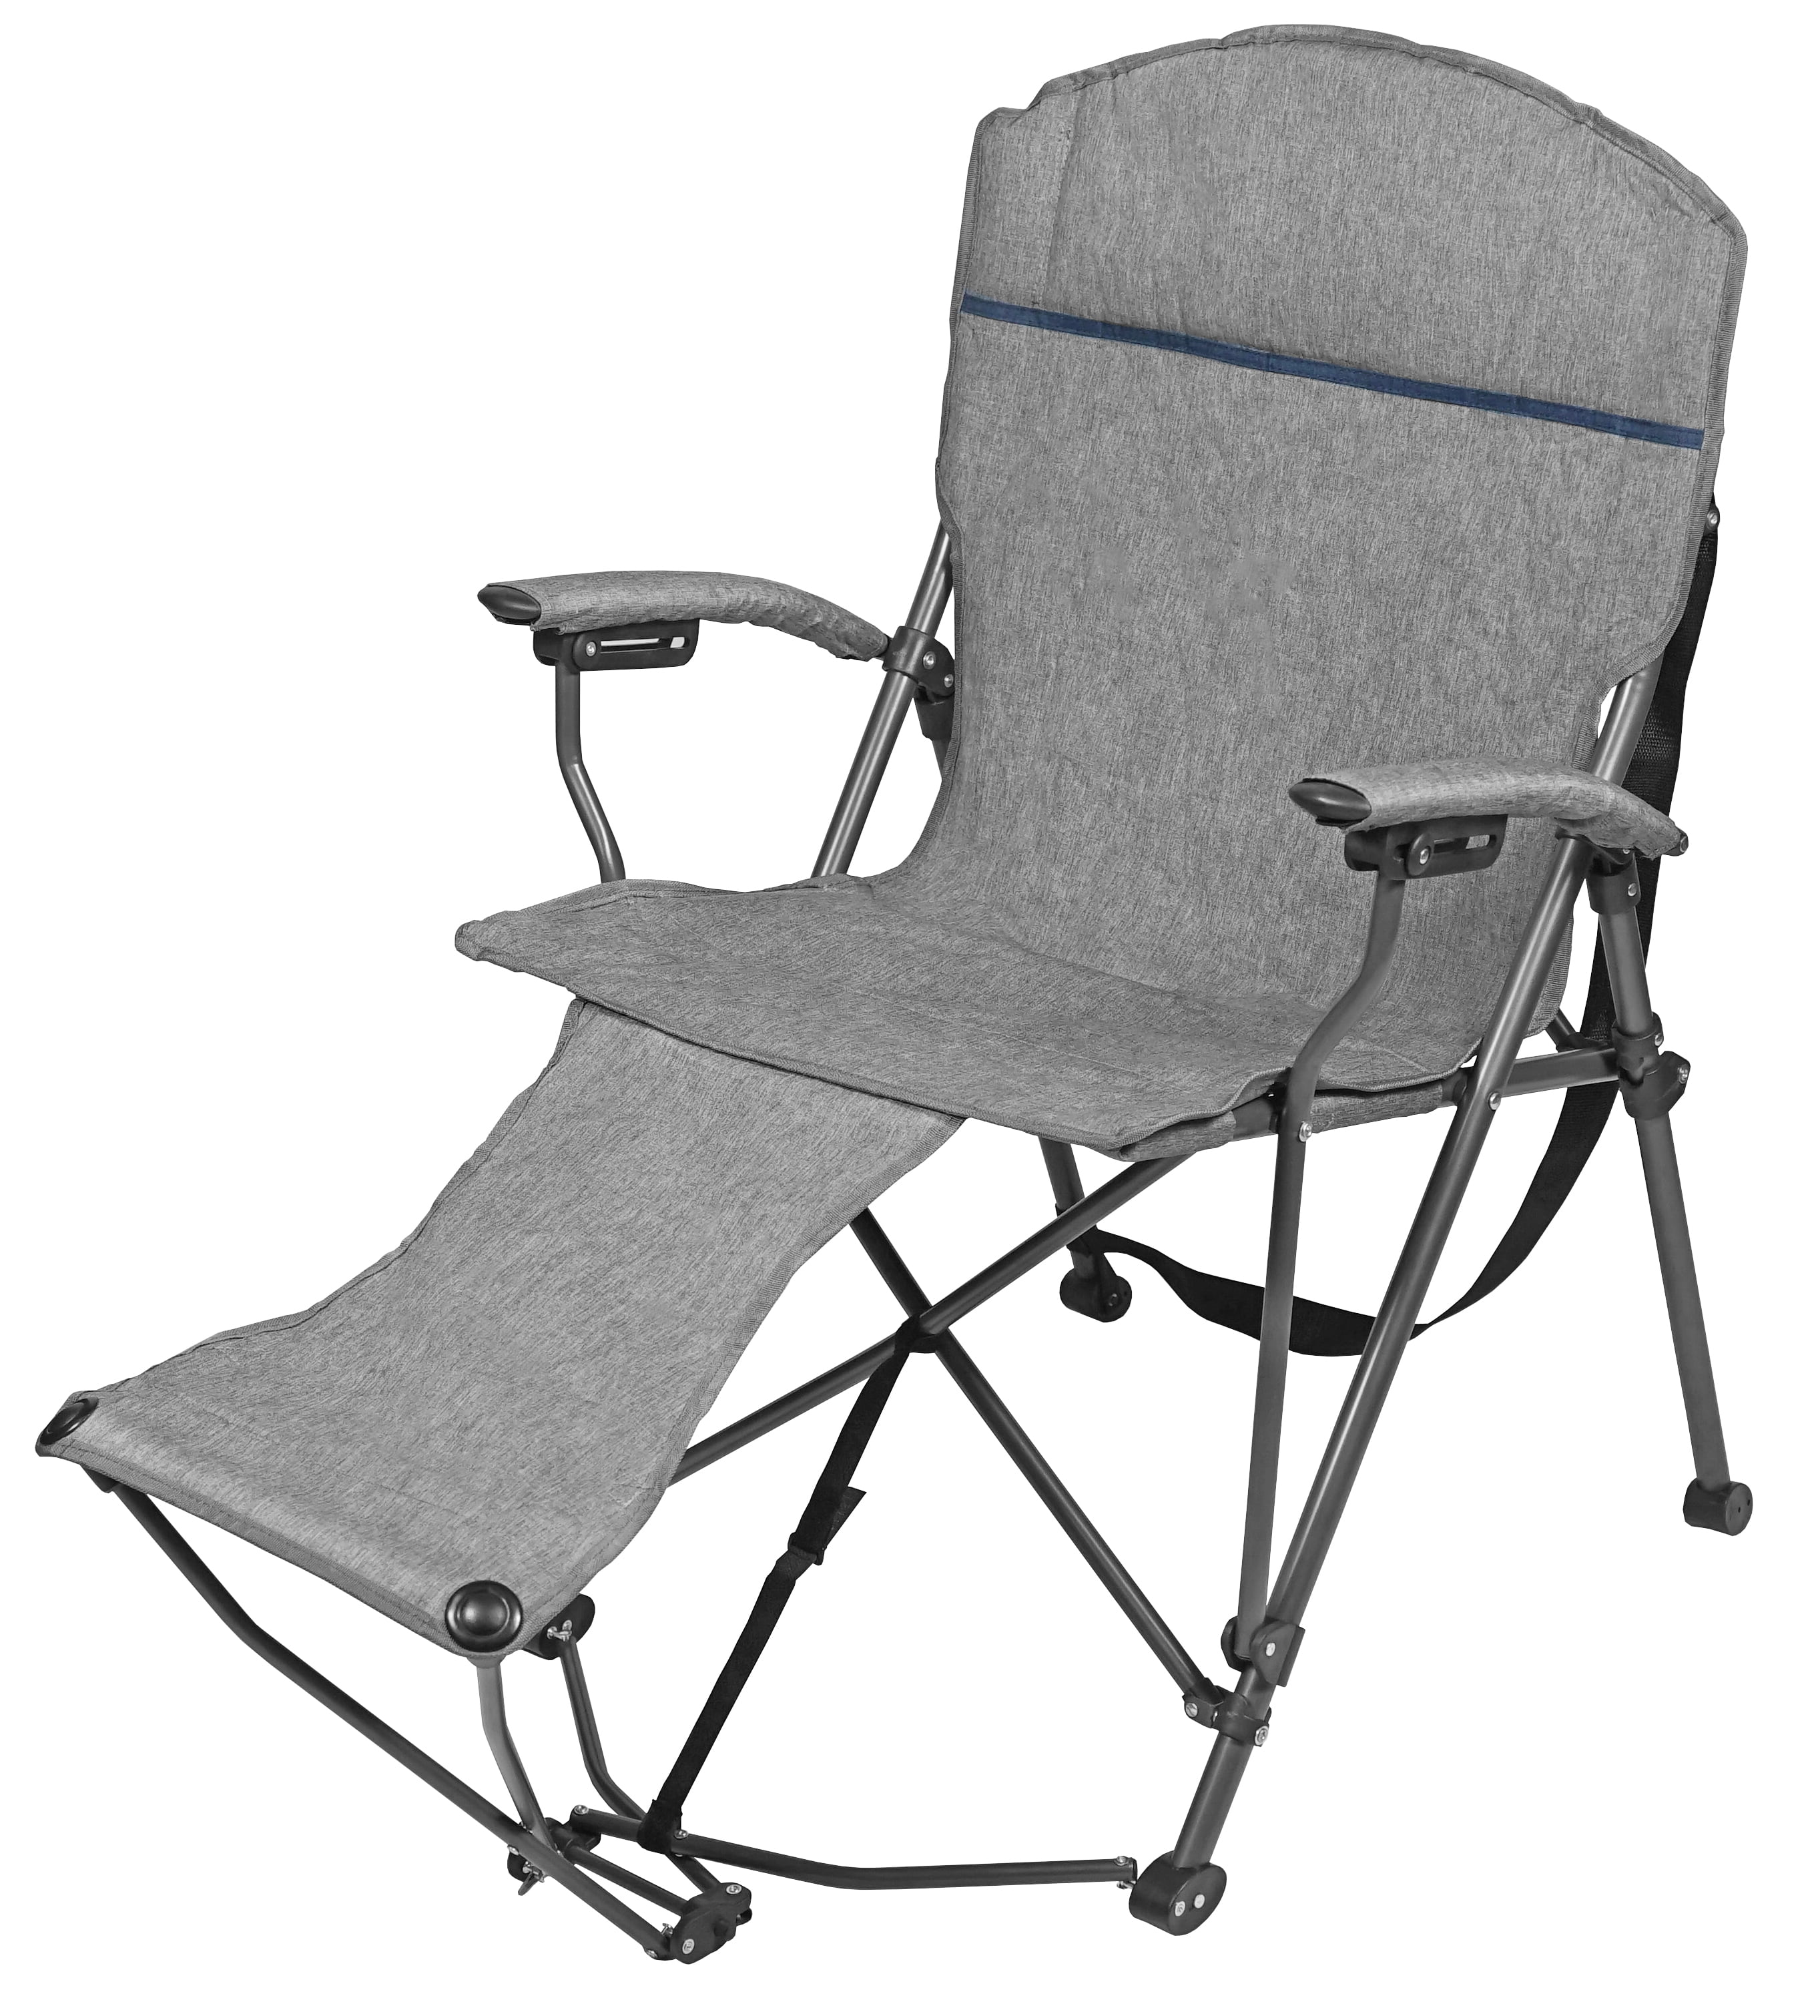 Zenithen Limited Black Hard Armed Chair with A Foot Rest